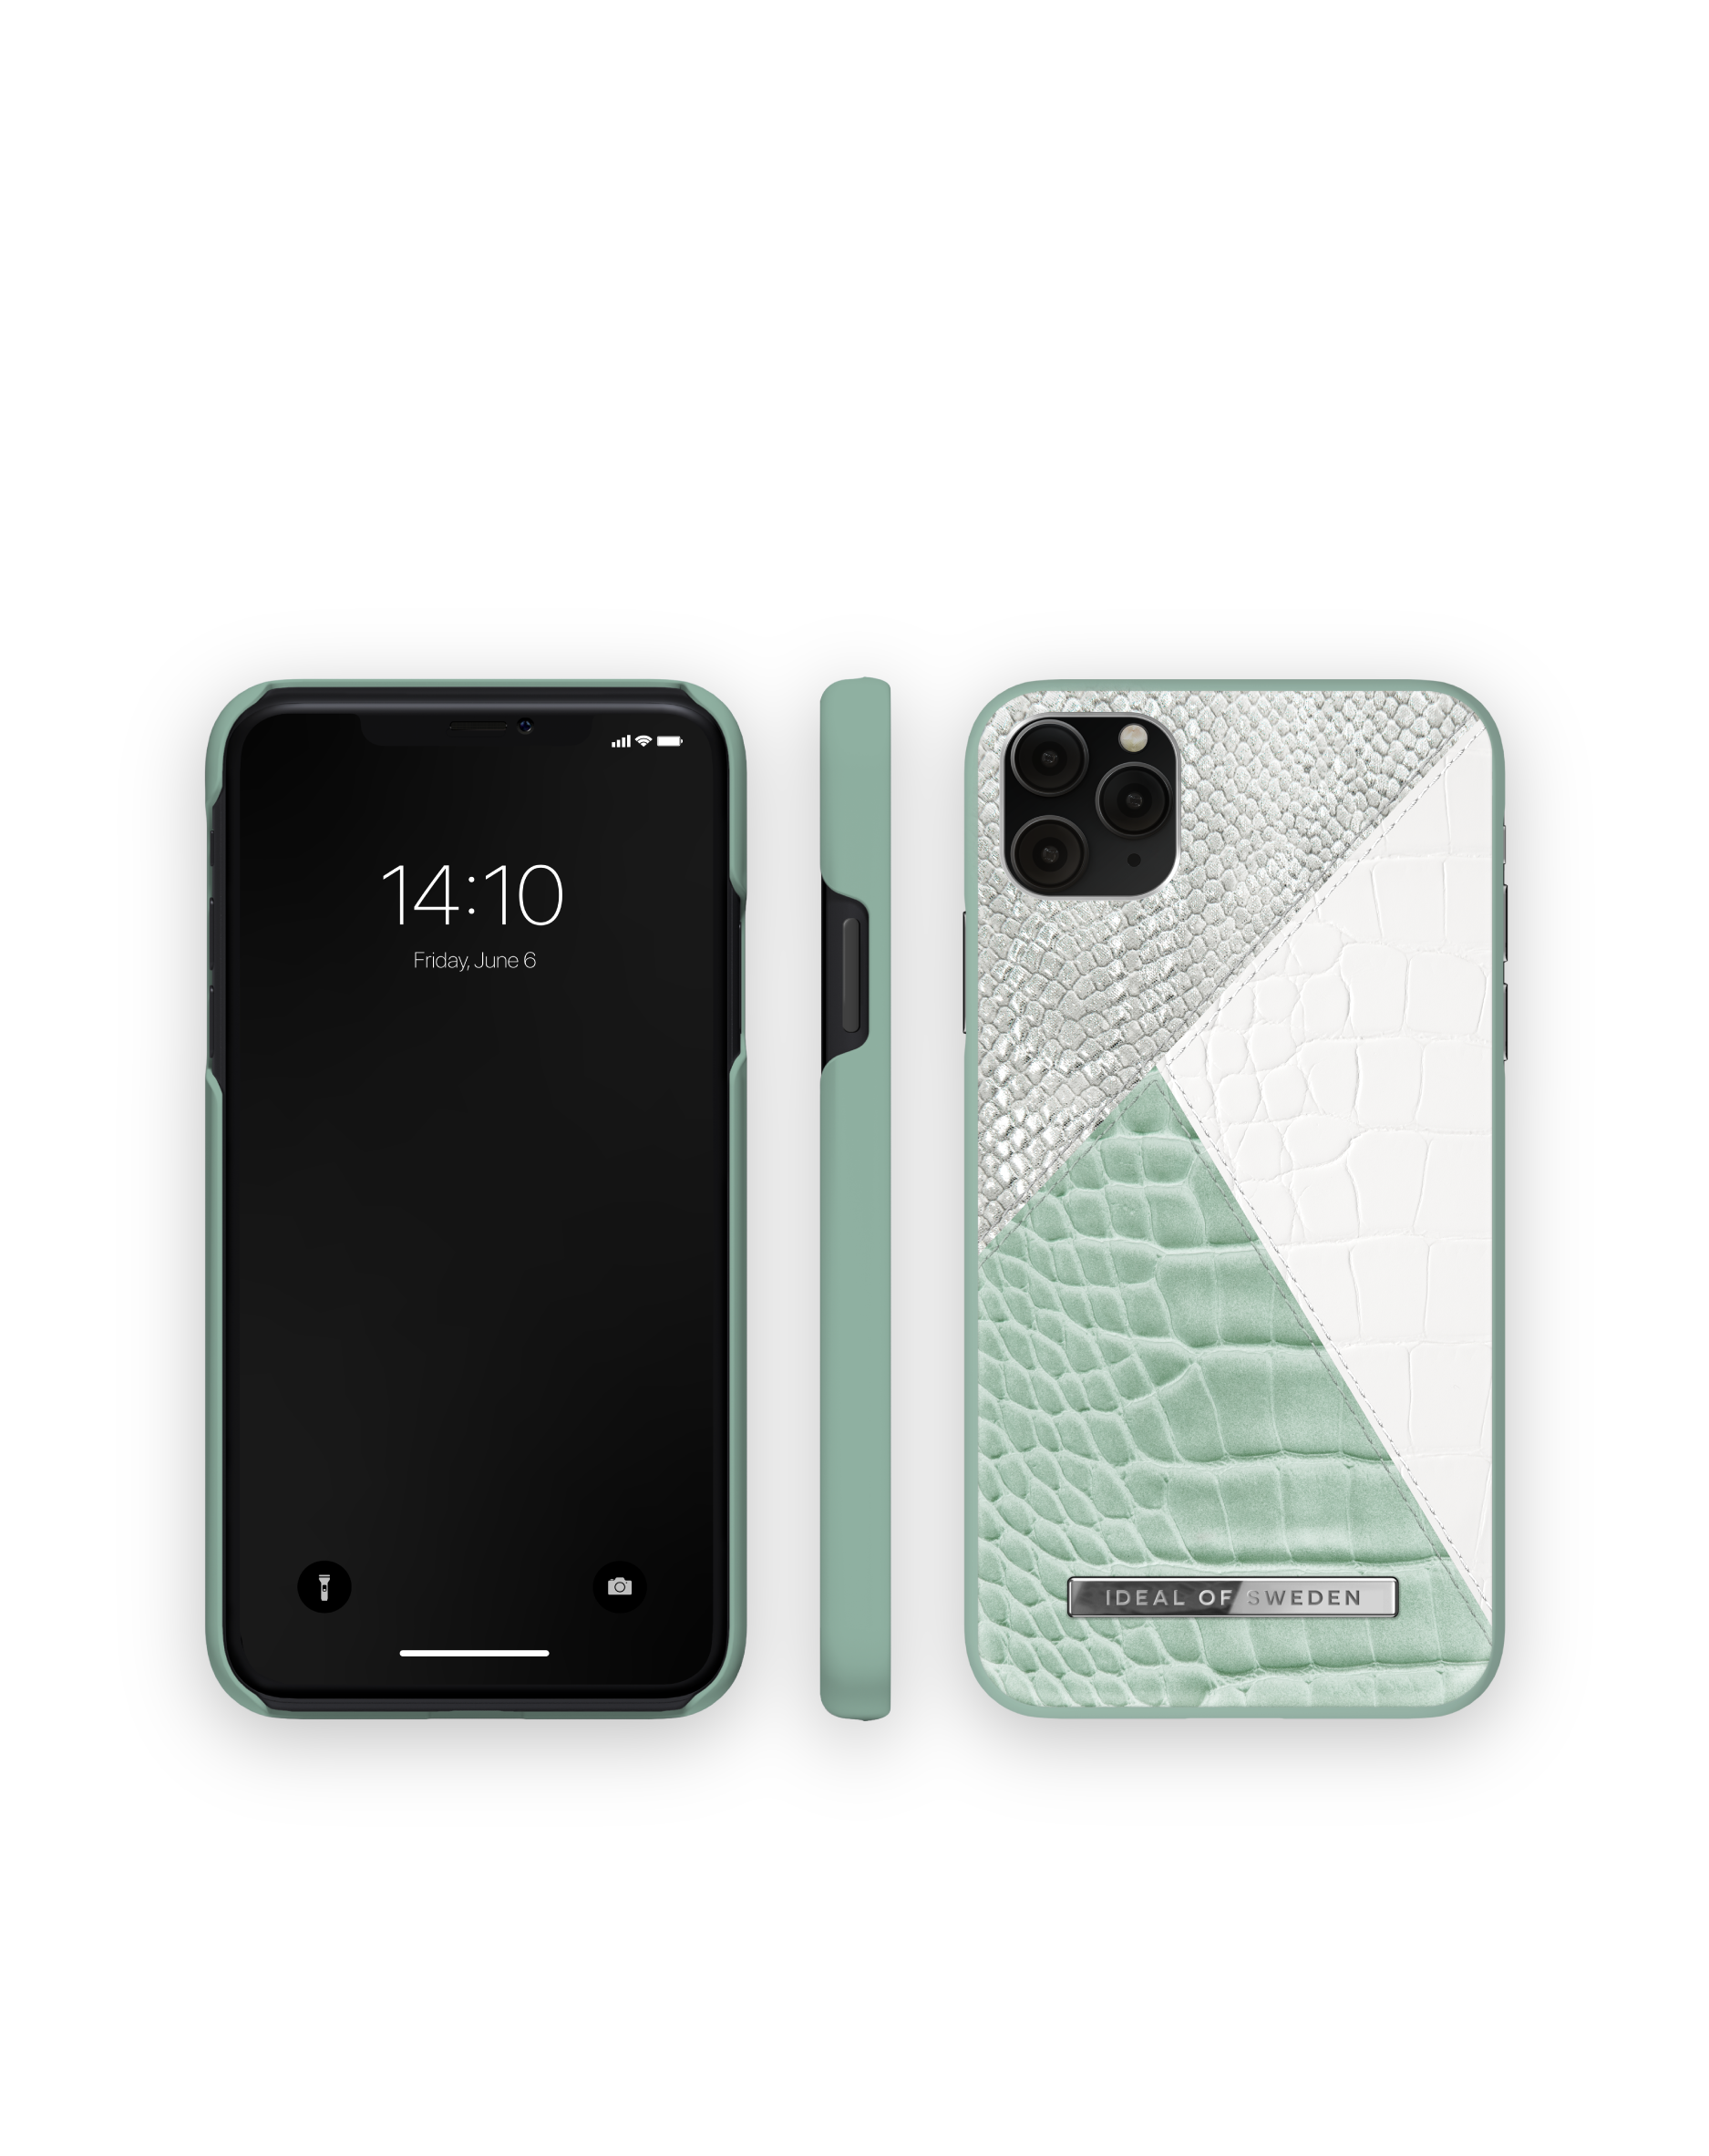 Snake 11 OF iPhone XS Mint Palladian Apple Backcover, Pro SWEDEN iPhone Max, IDEAL Apple, Max, Apple IDACSS21-I1965-268,